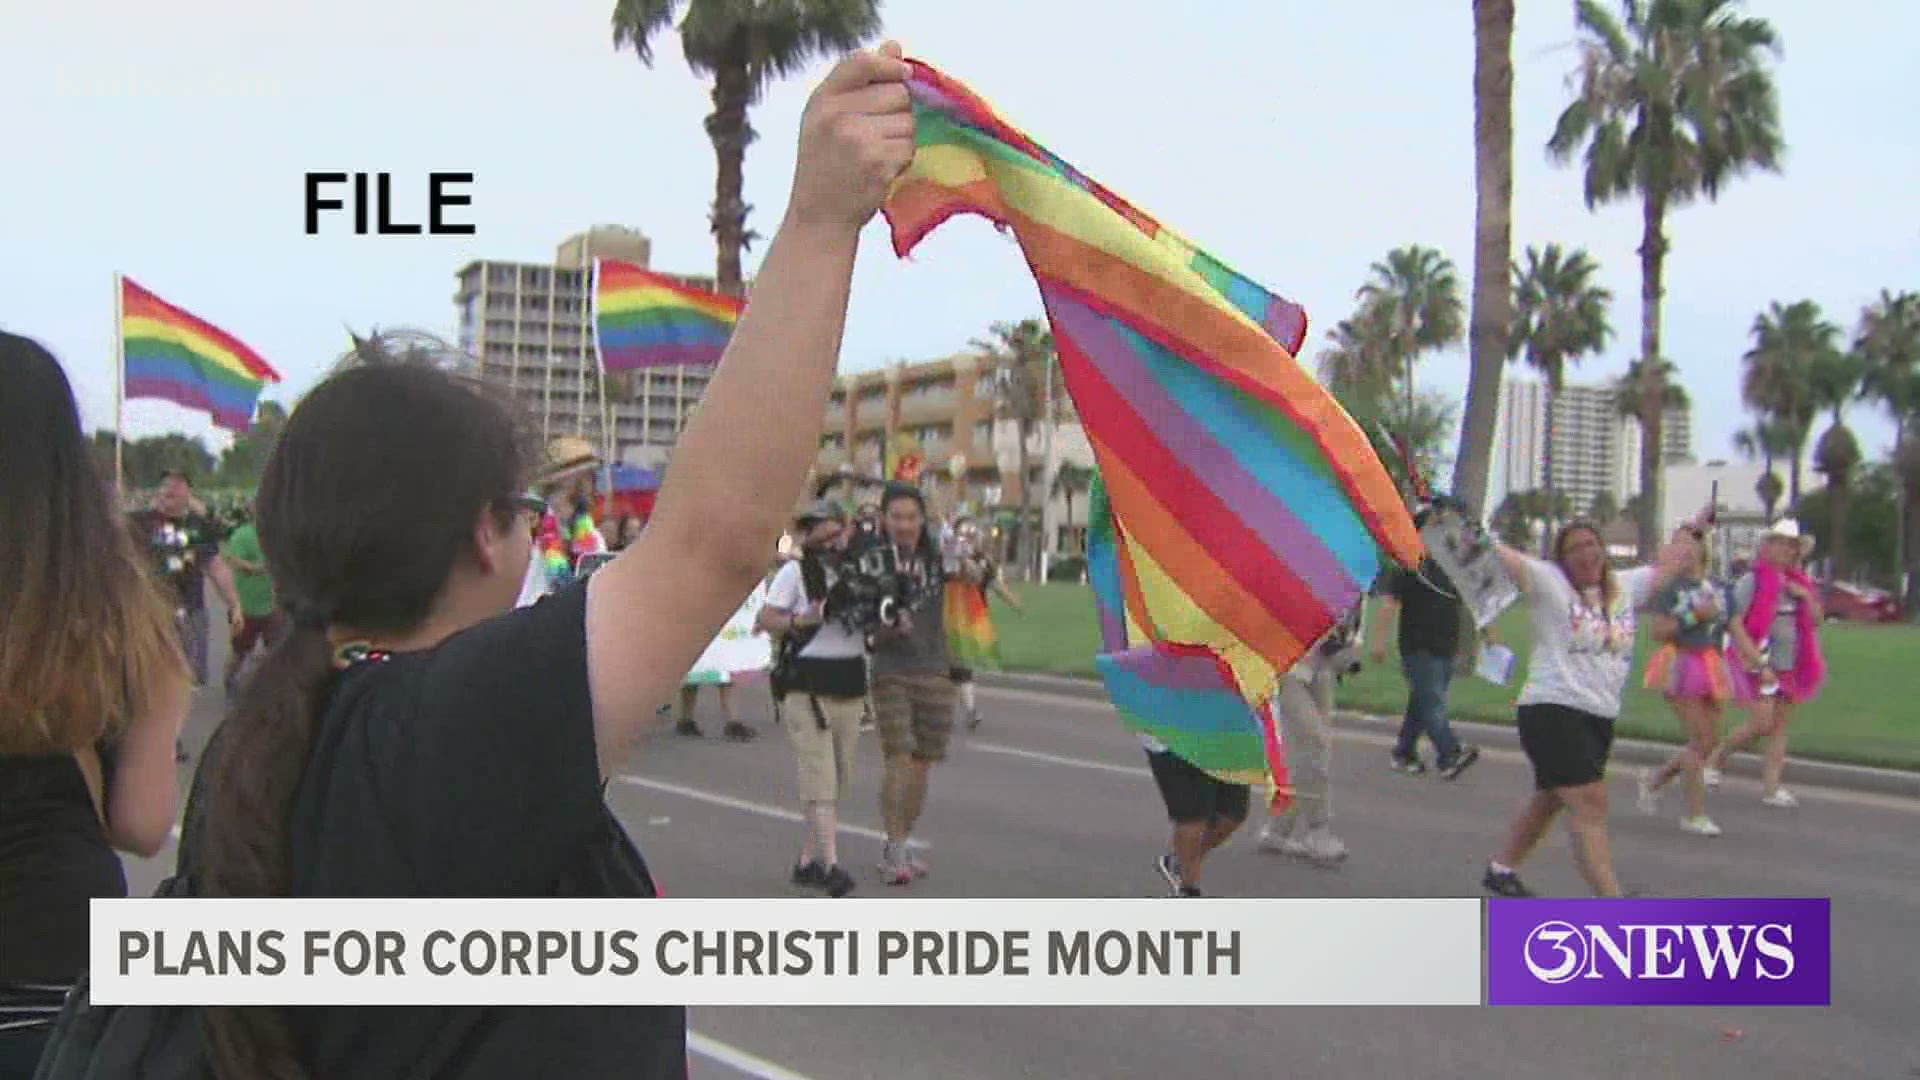 There will be several events in June, but the traditional larger PRIDE Parade and Block Party has been set for October, during LGBT History Month.